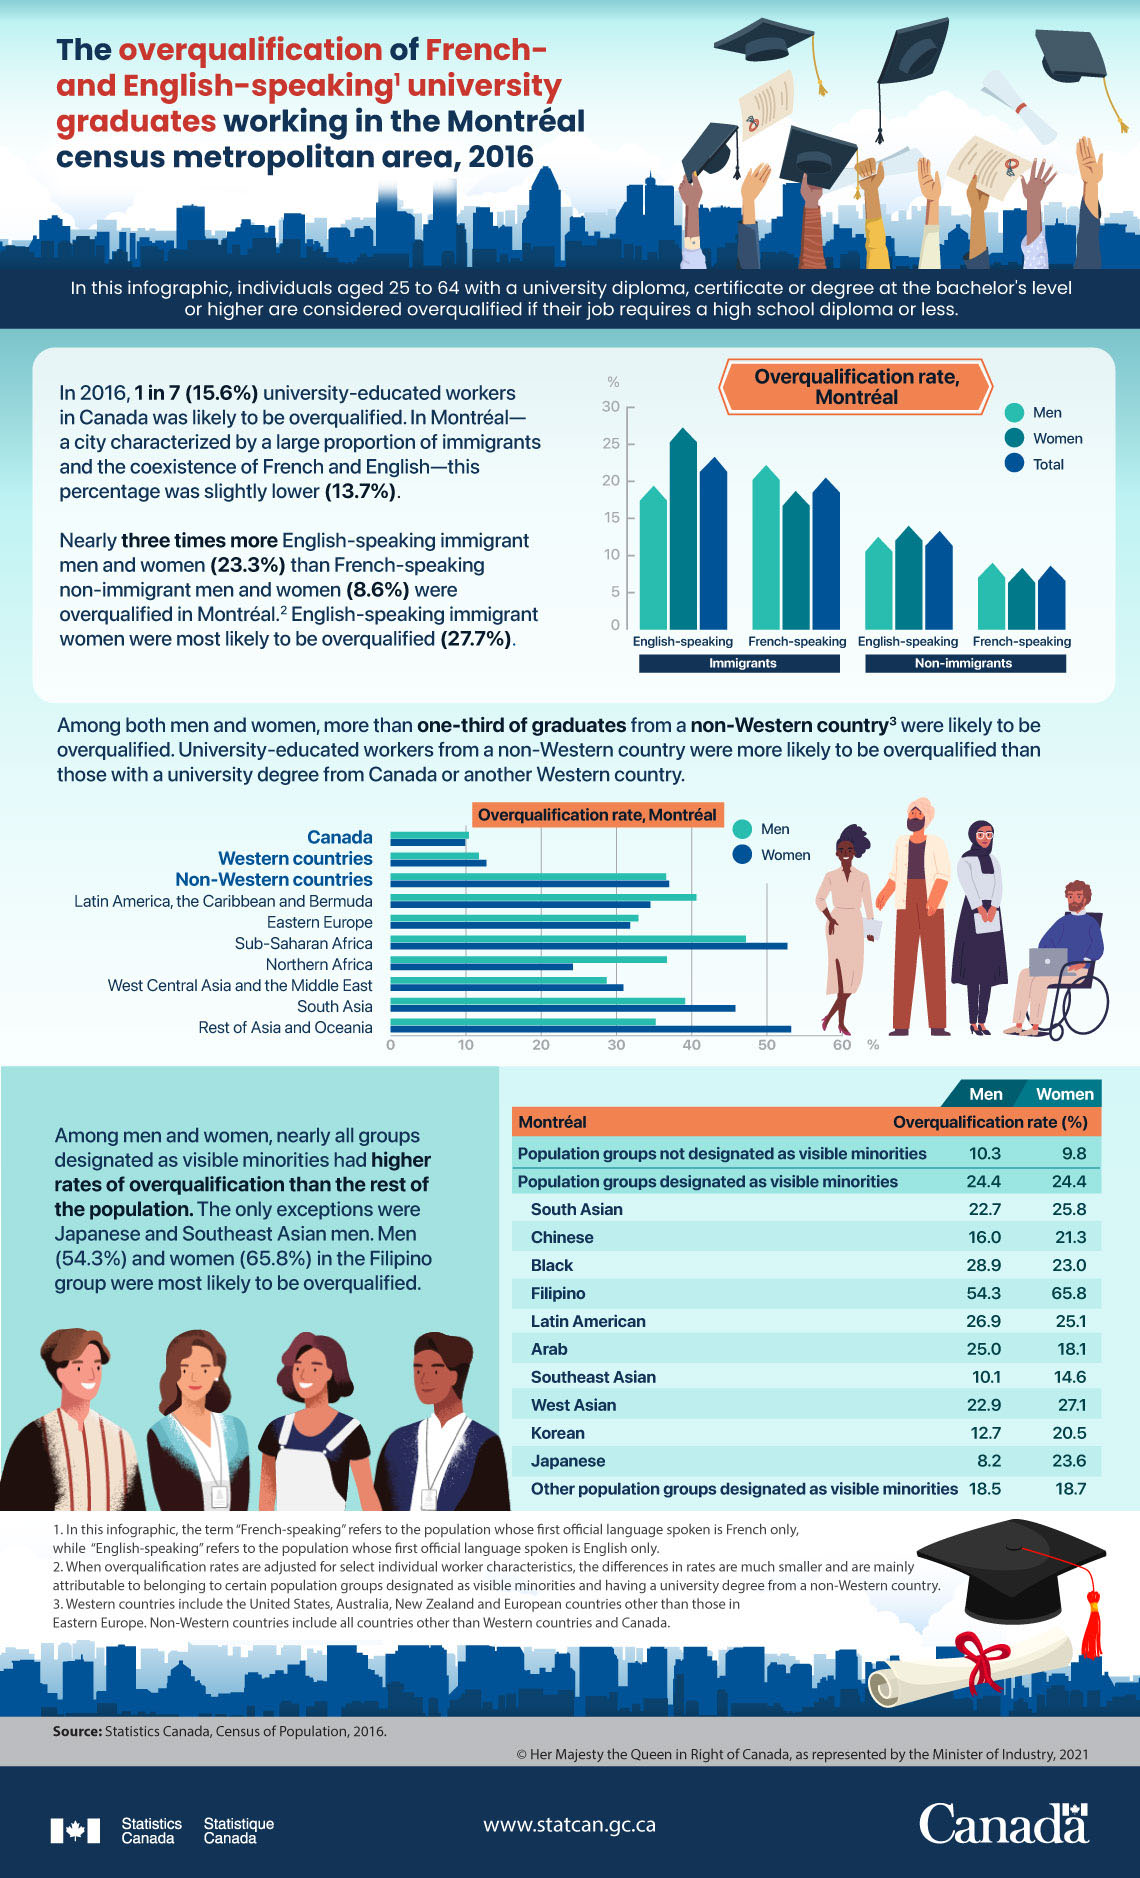 Infographic: The overqualification of French and English-speaking university graduates working in the Montréal census metropolitan area, 2016